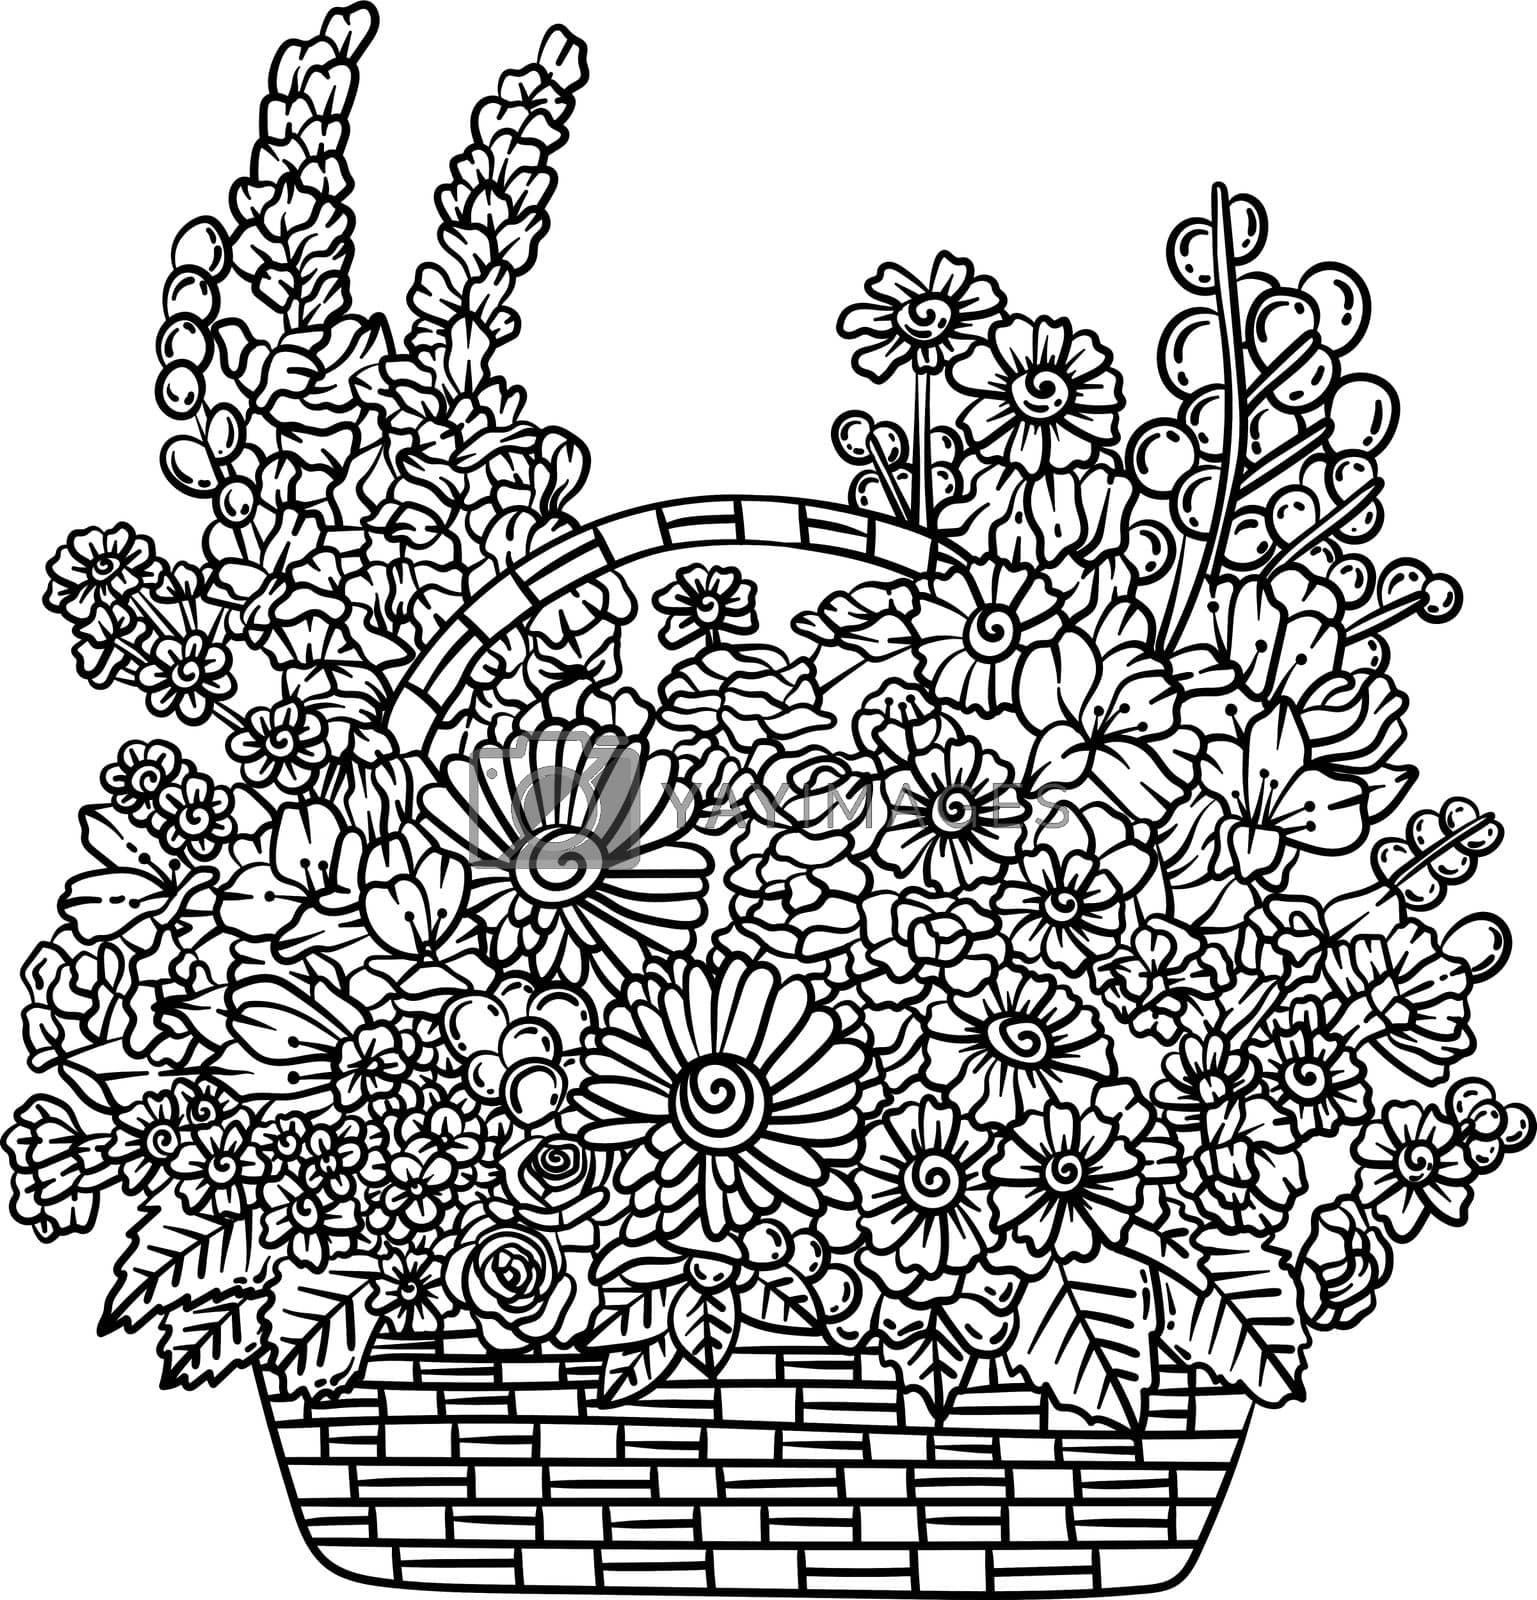 Royalty free image of Basket of Flowers Spring Coloring Page for Adults by abbydesign